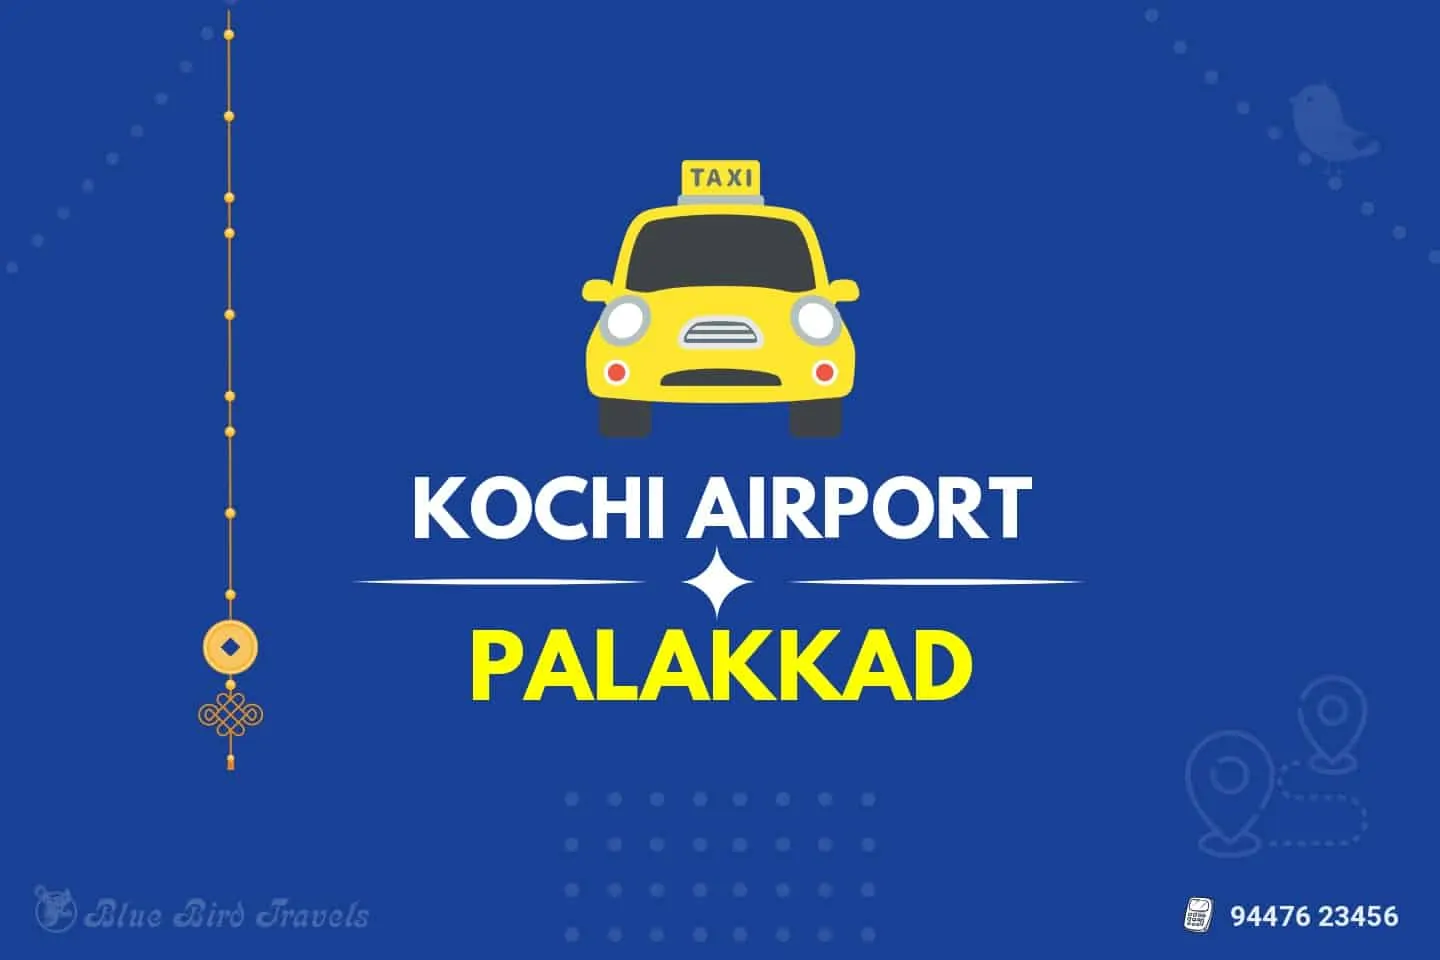 Kochi Airport to Palakkad Taxi (featured Image )